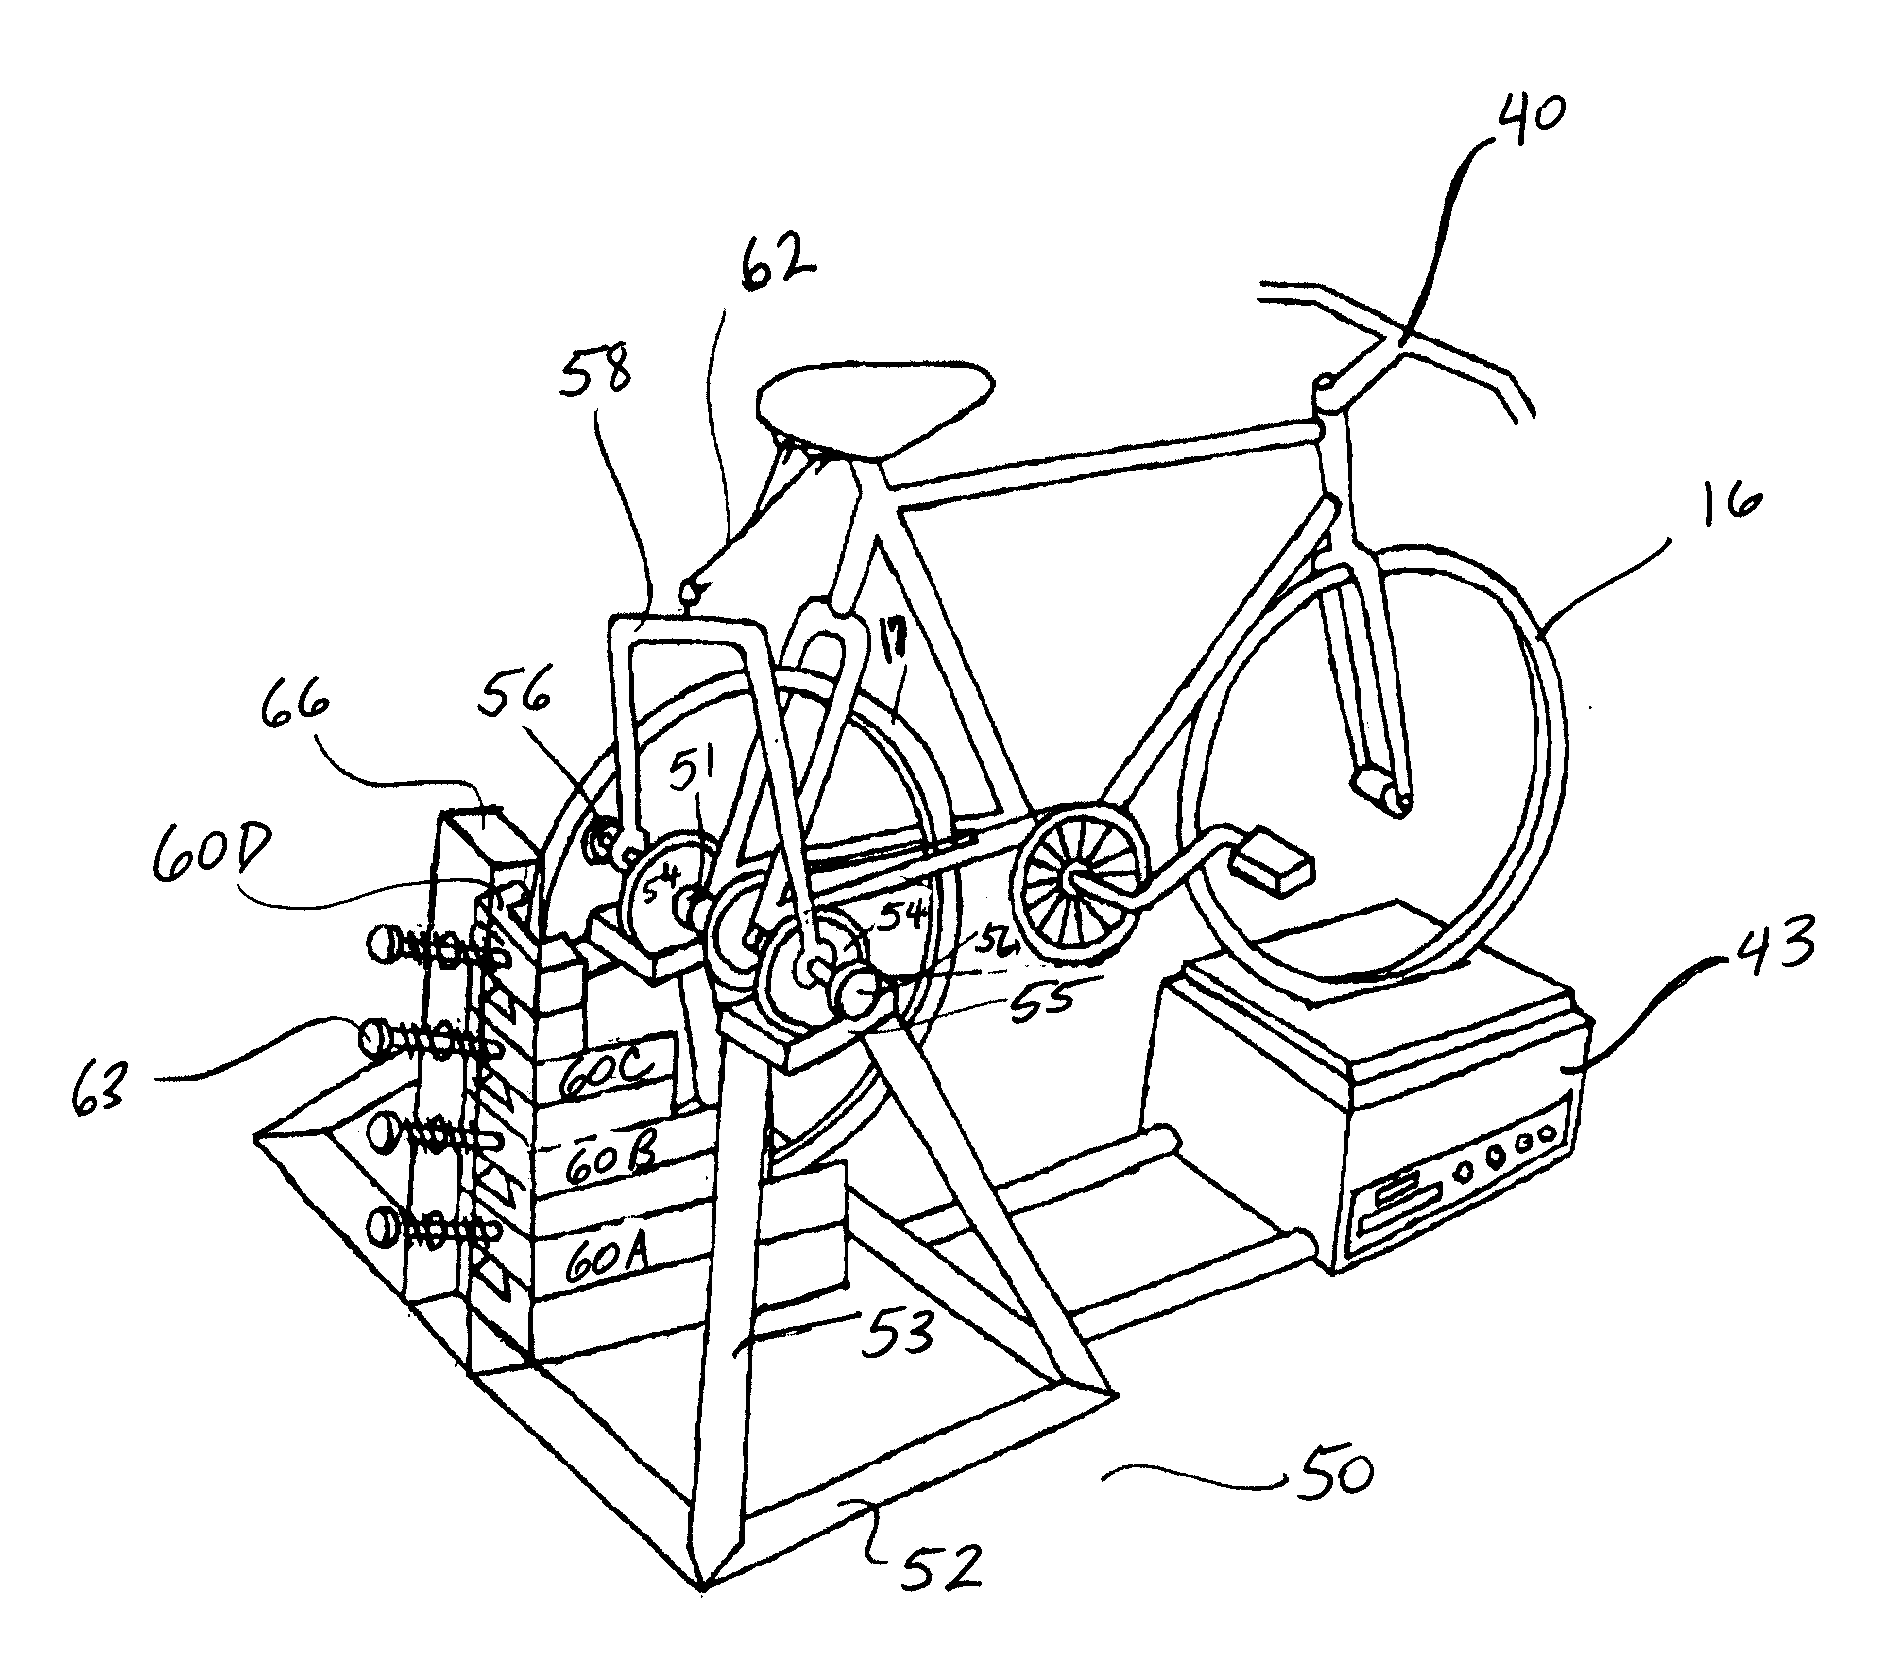 Bicycle trainer with variable magnetic resistance to pedaling